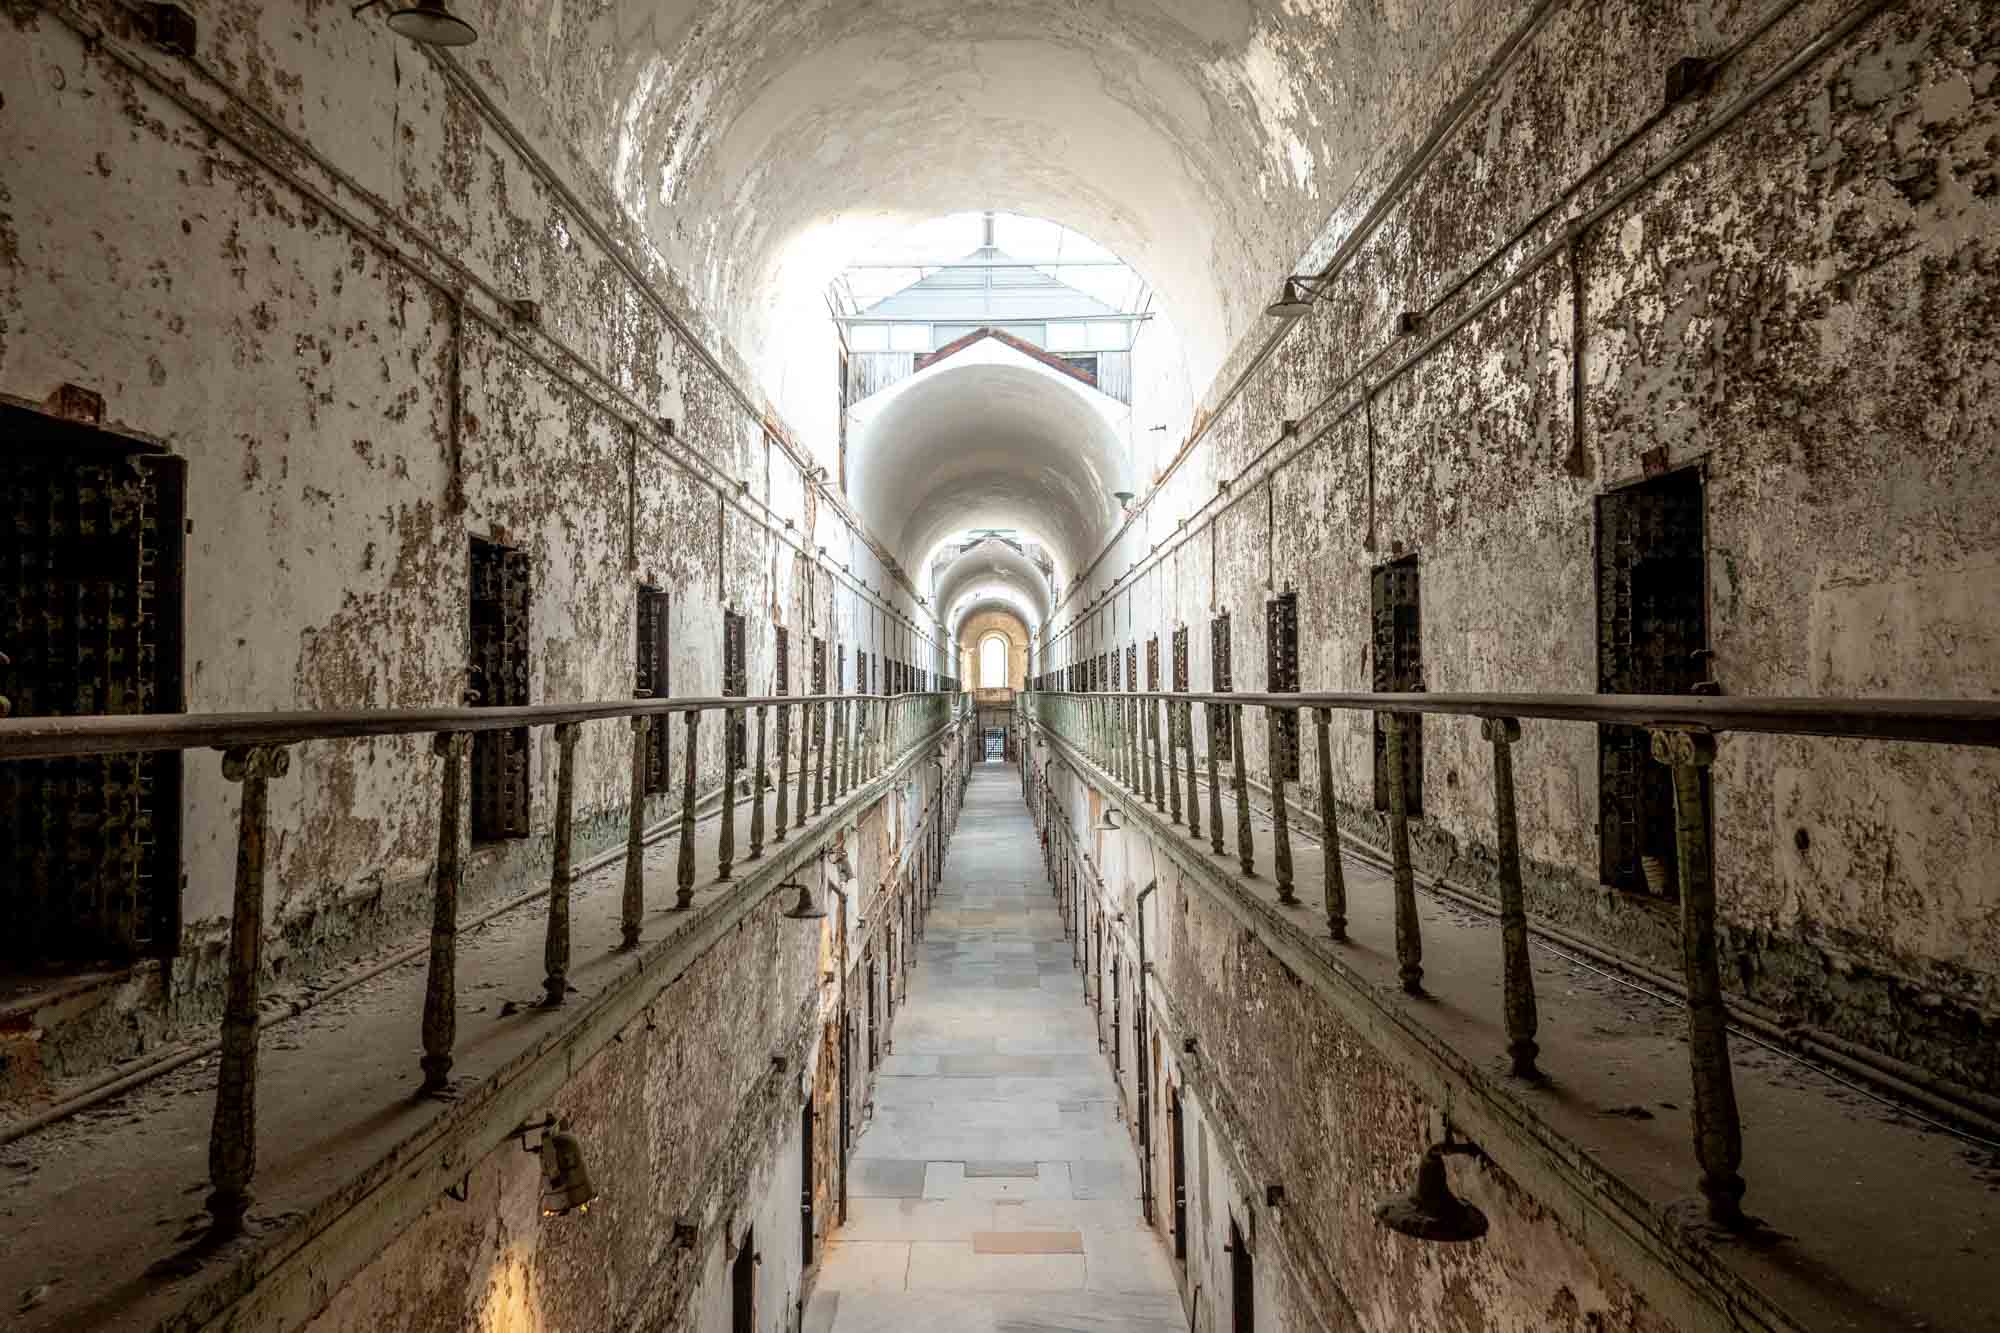 Cell block of Eastern State Penitentiary, an abandoned jail